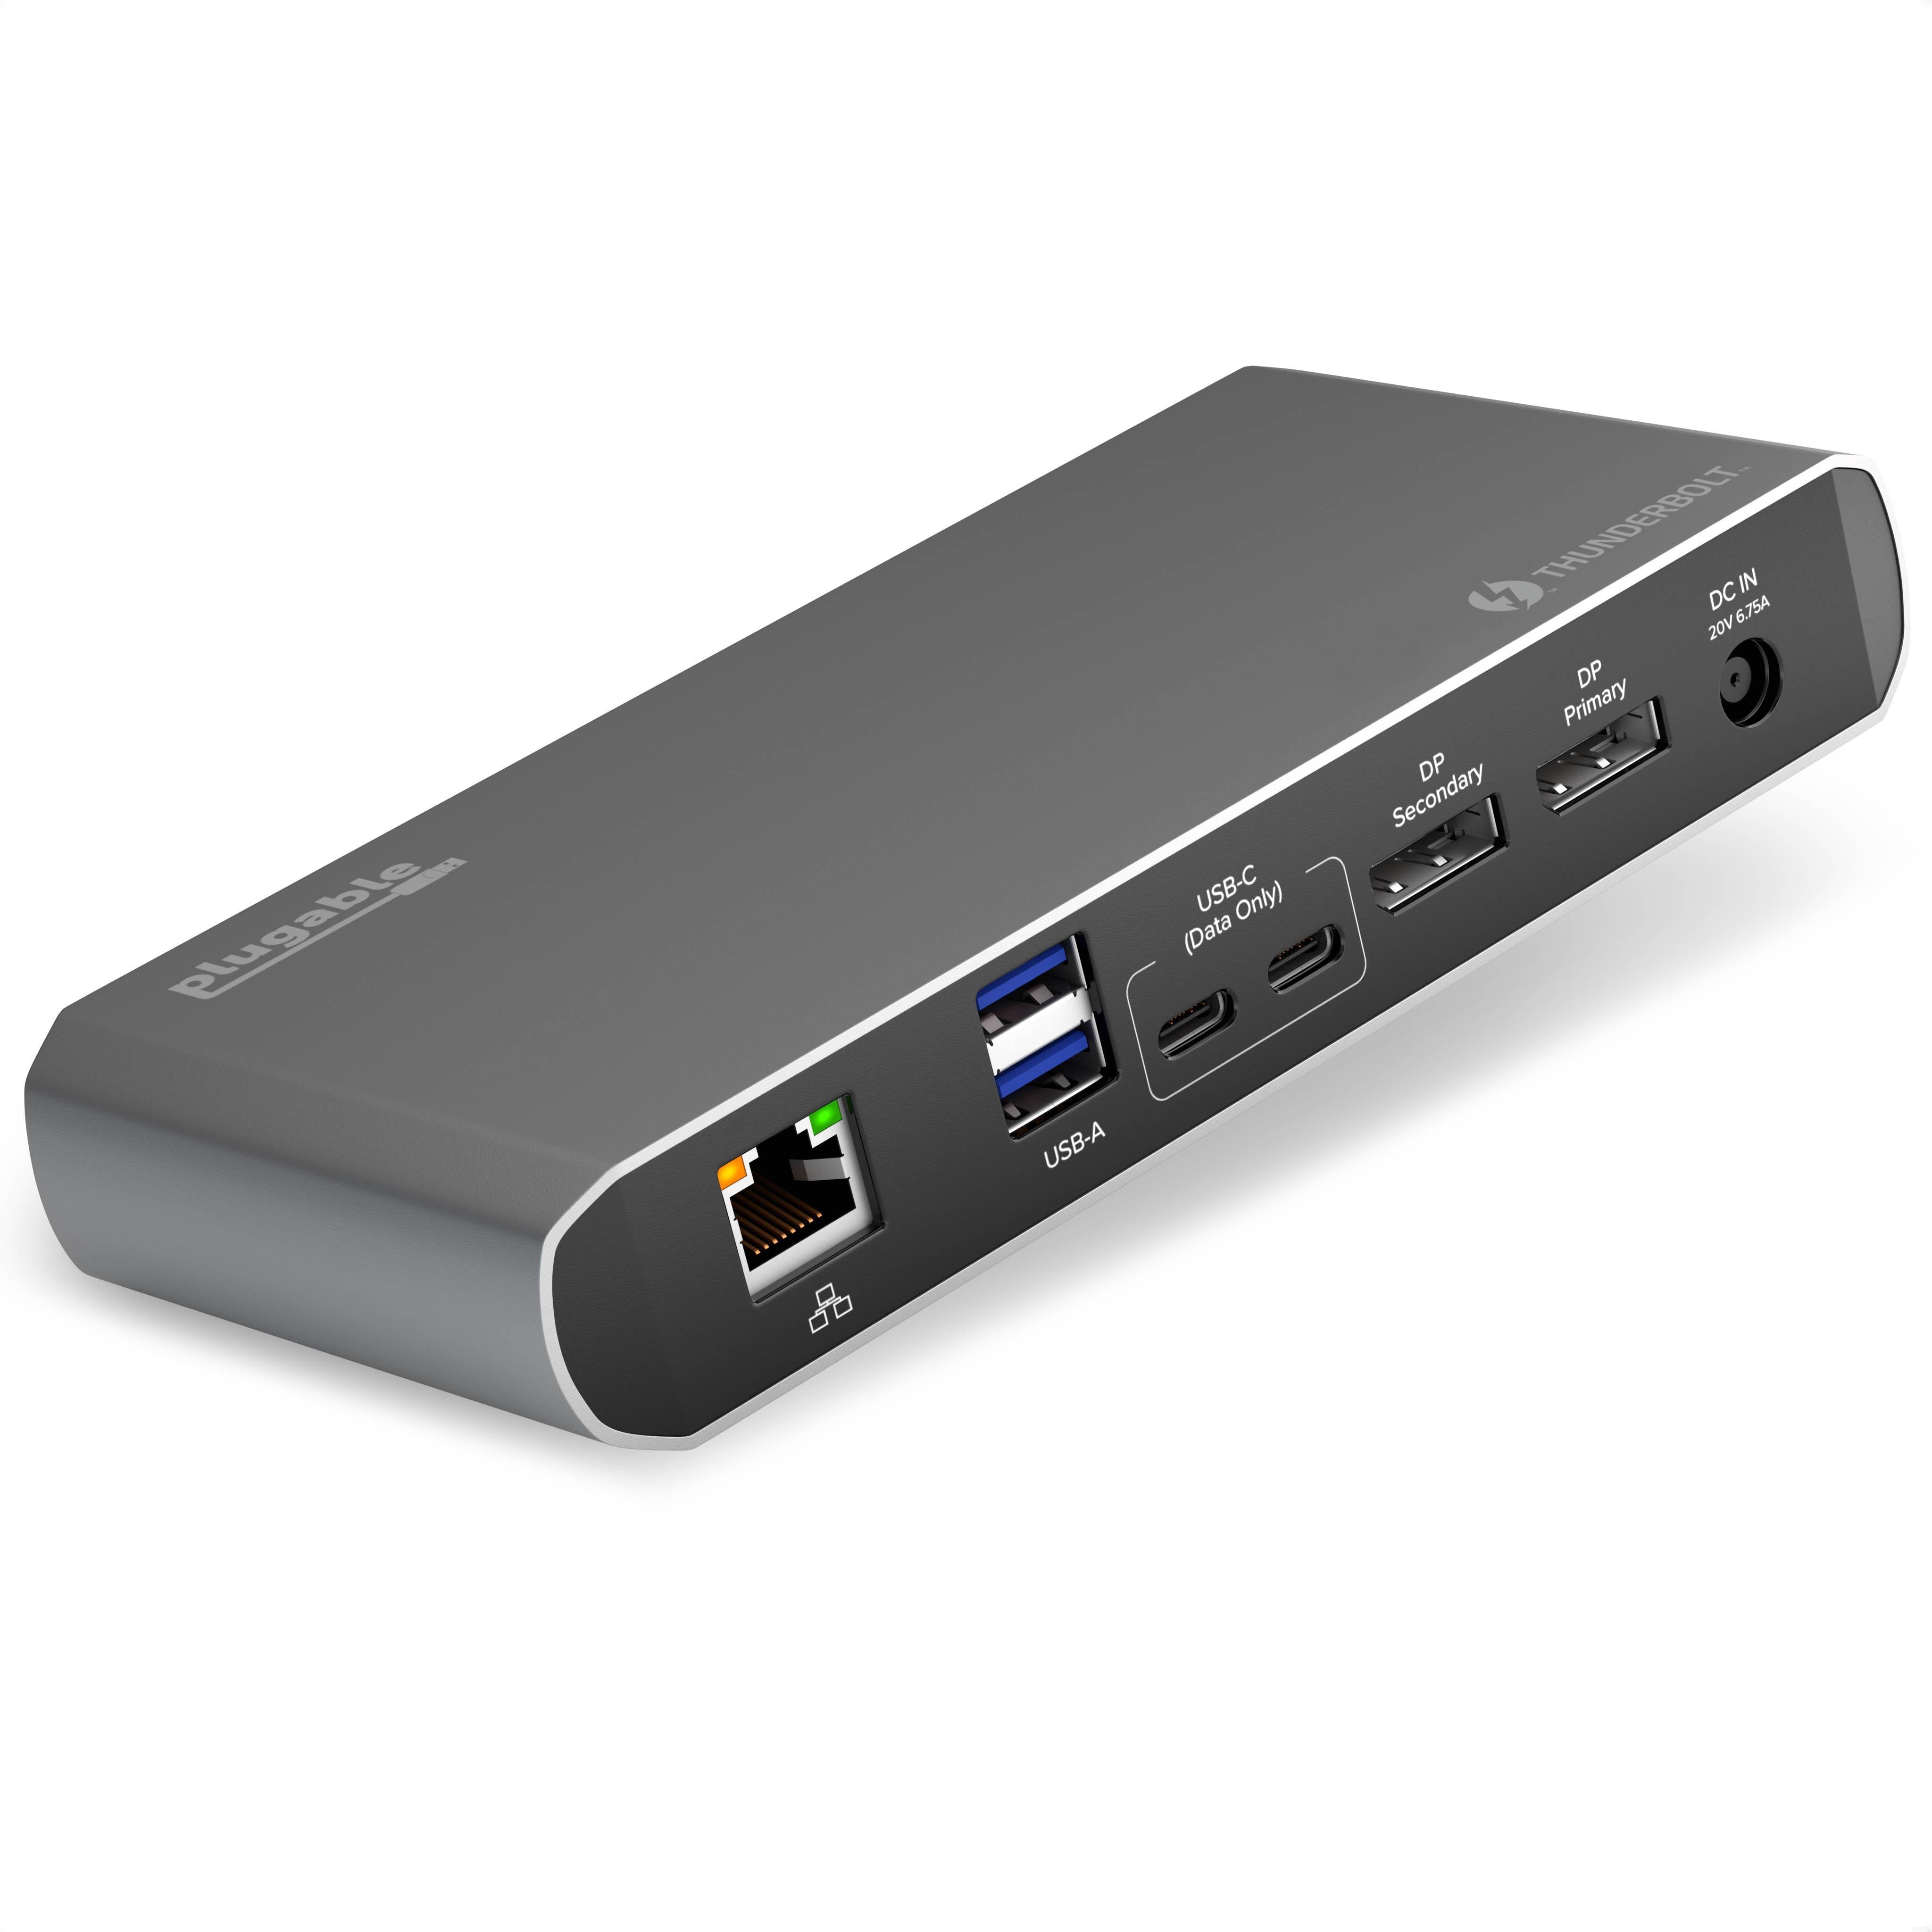 Plugable Thunderbolt™ and Dual Display Station with 60W – Plugable